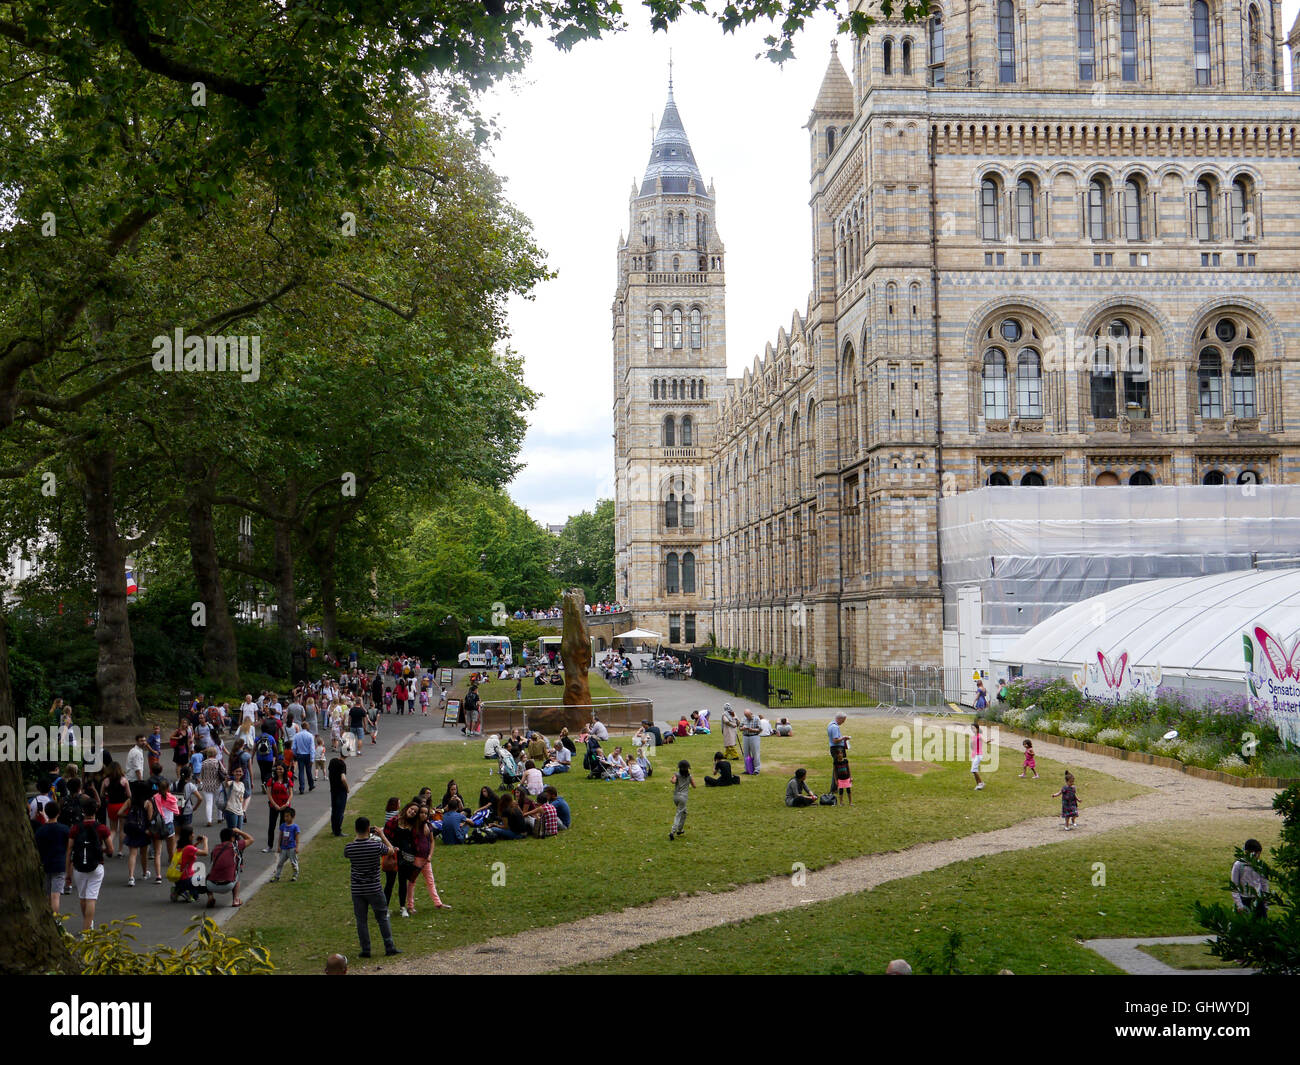 people walking and relaxing on the grass beside the Natural history museum, London, England Stock Photo